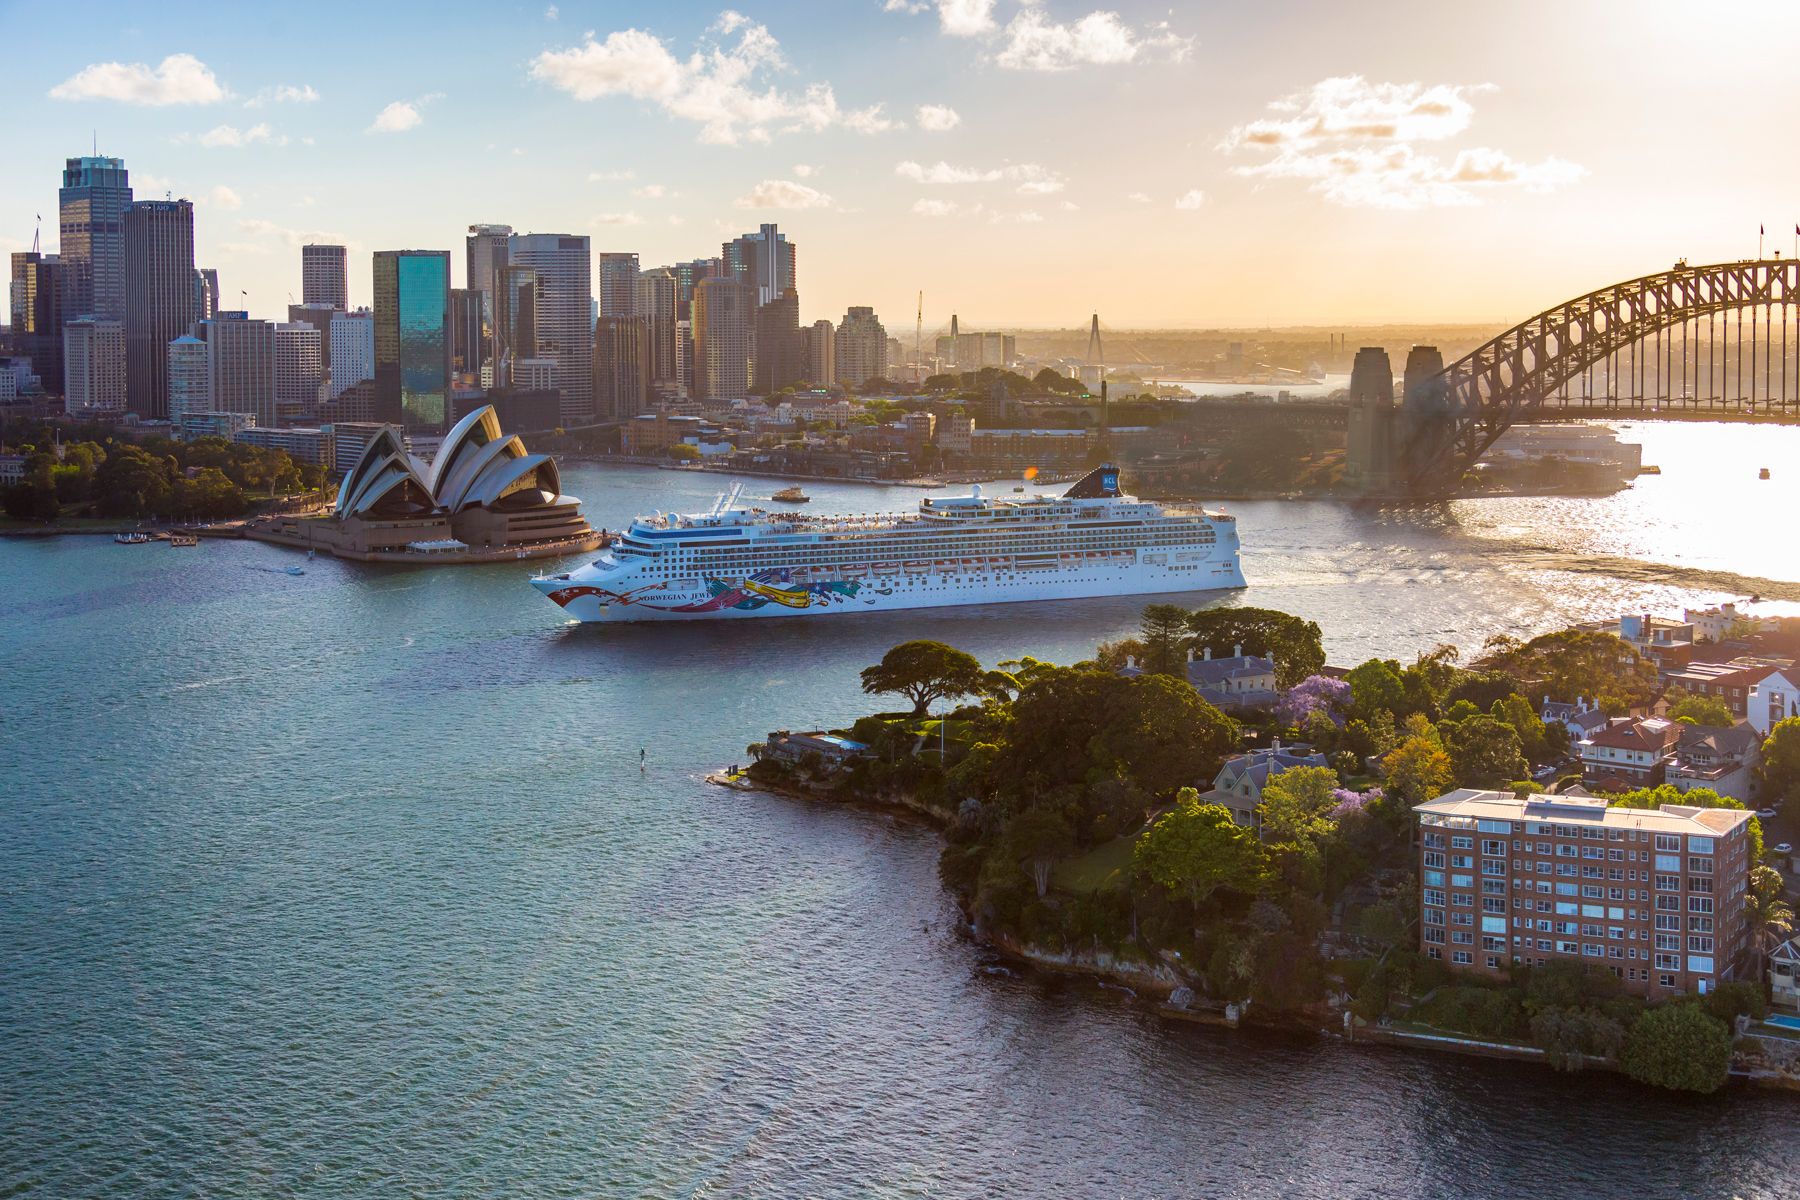 Norwegian Jewel on its way to Sydney for 2018/19